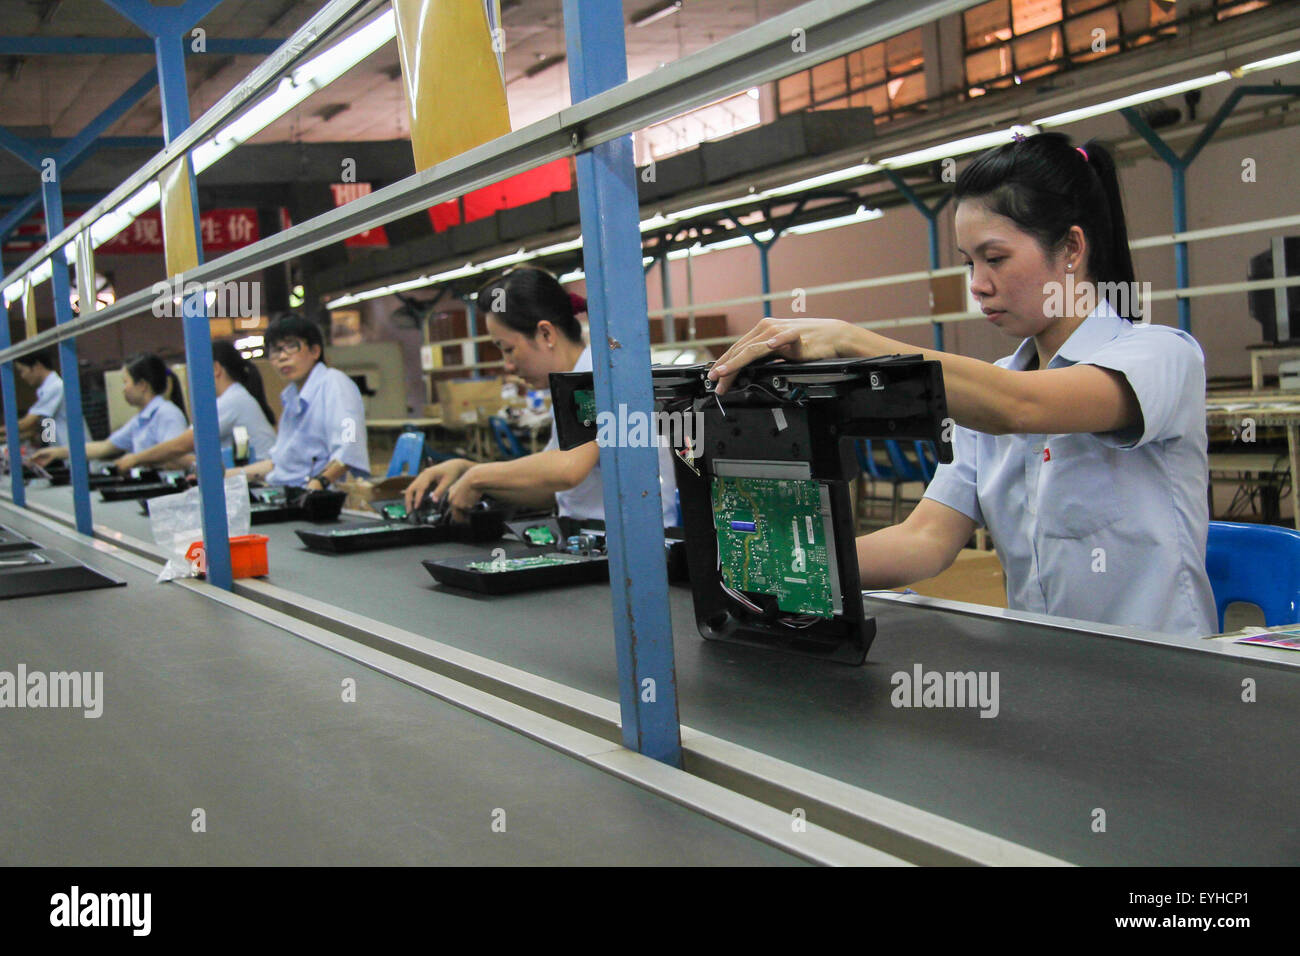 (150730) -- HO CHI MINH CITY, July 30, 2015 (Xinhua) -- File Photo taken on July 10, 2015 shows people work at the TCL Company Factory in Dong Nai province, Vietnam. To gain big market shares in the global market and the Vietnamese market in particular, Chinese electronics giant TCL has focused on all-round localization strategies to tap deeply into Vietnam's economy for joint development. Right after setting foot on Vietnamese soil in 1999, TCL set targets of developing its own brands, distribution networks and technologies. Now, TCL Vietnam has over 200 authorized dealers and distribution ne Stock Photo